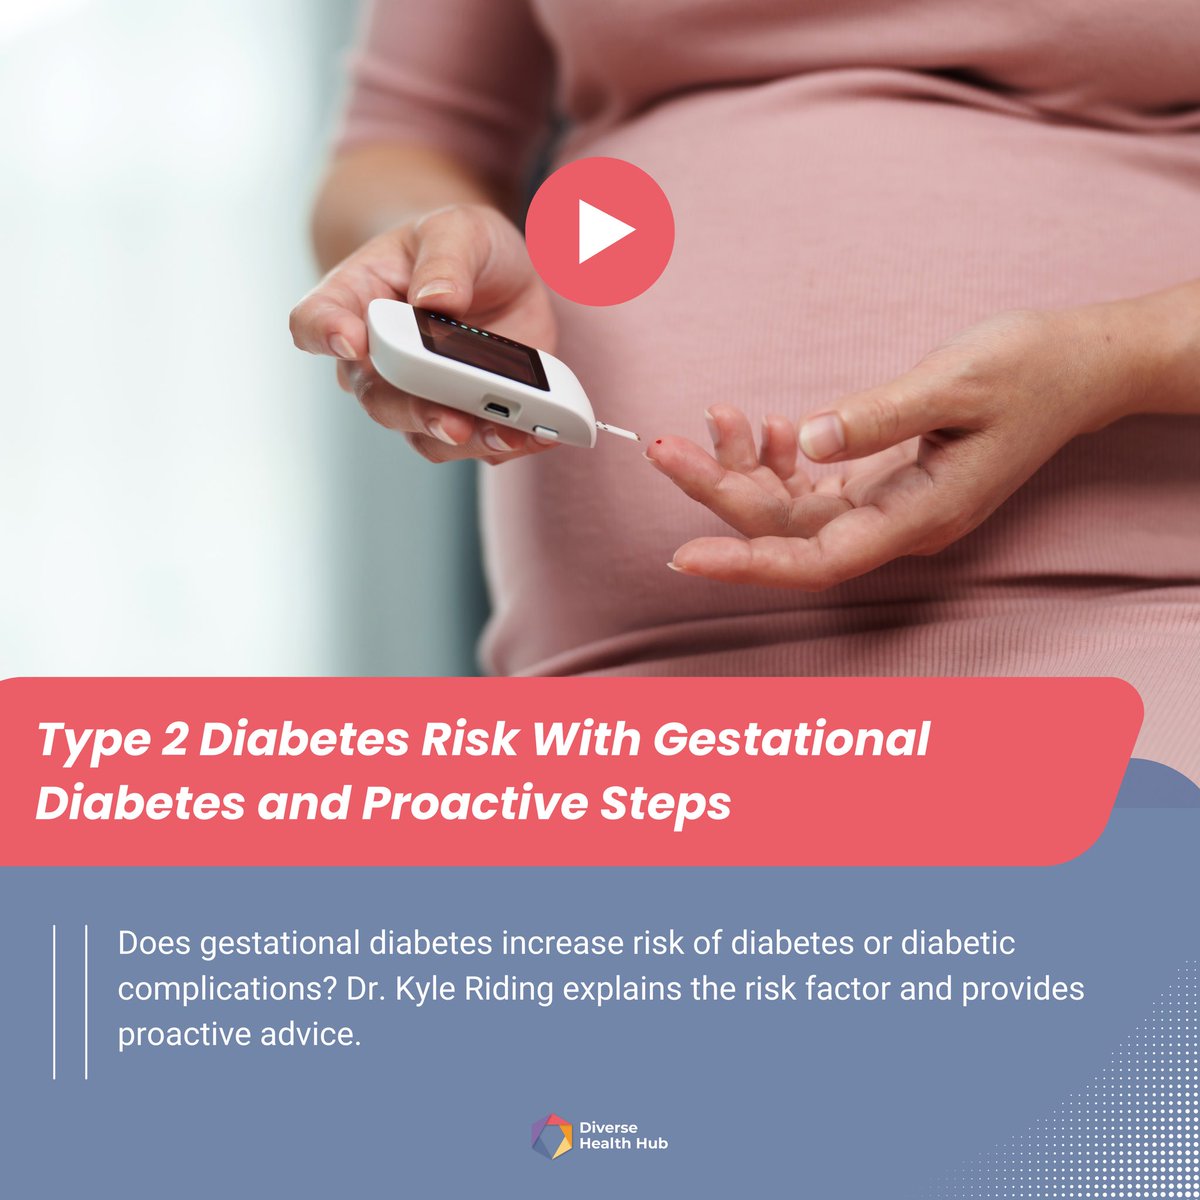 New #diagnosticsdecoded 🎥 is out now!
Discover the link between #gestationaldiabetes and increased risk of type 2 diabetes. Dr. Kyle Riding @KRidingMLS shares important info and proactive tips to help prevent future #diabetes.
Watch the short 🎥: bit.ly/3xBZYb0